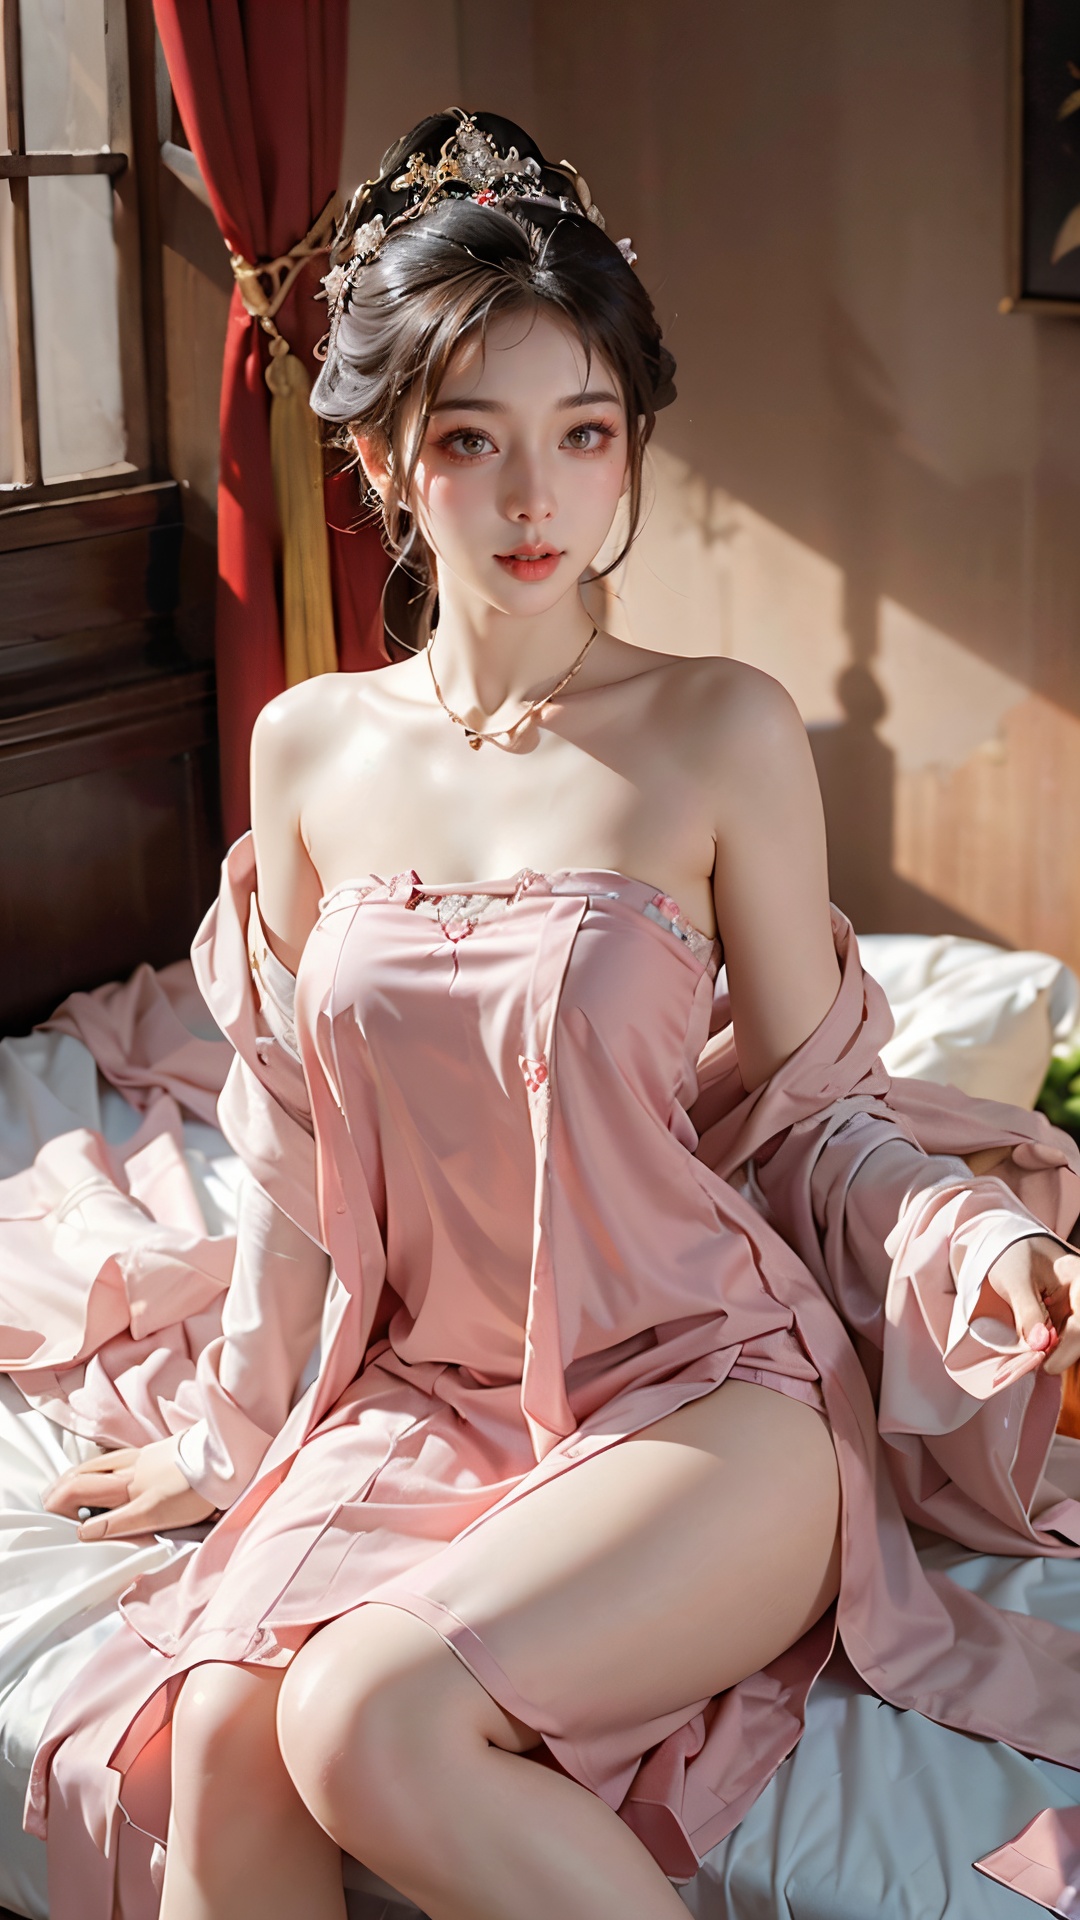 Best quality,Ultra-detailed,Realistic,A high resolution,Portrait,full bodyesbia,Beautiful woman,full bodyesbian,pink dudou,Miniskirt,Palatial bed,ornate bed,Flawless makeup,suns rays,Beauty,elicate and refined,Stunning,